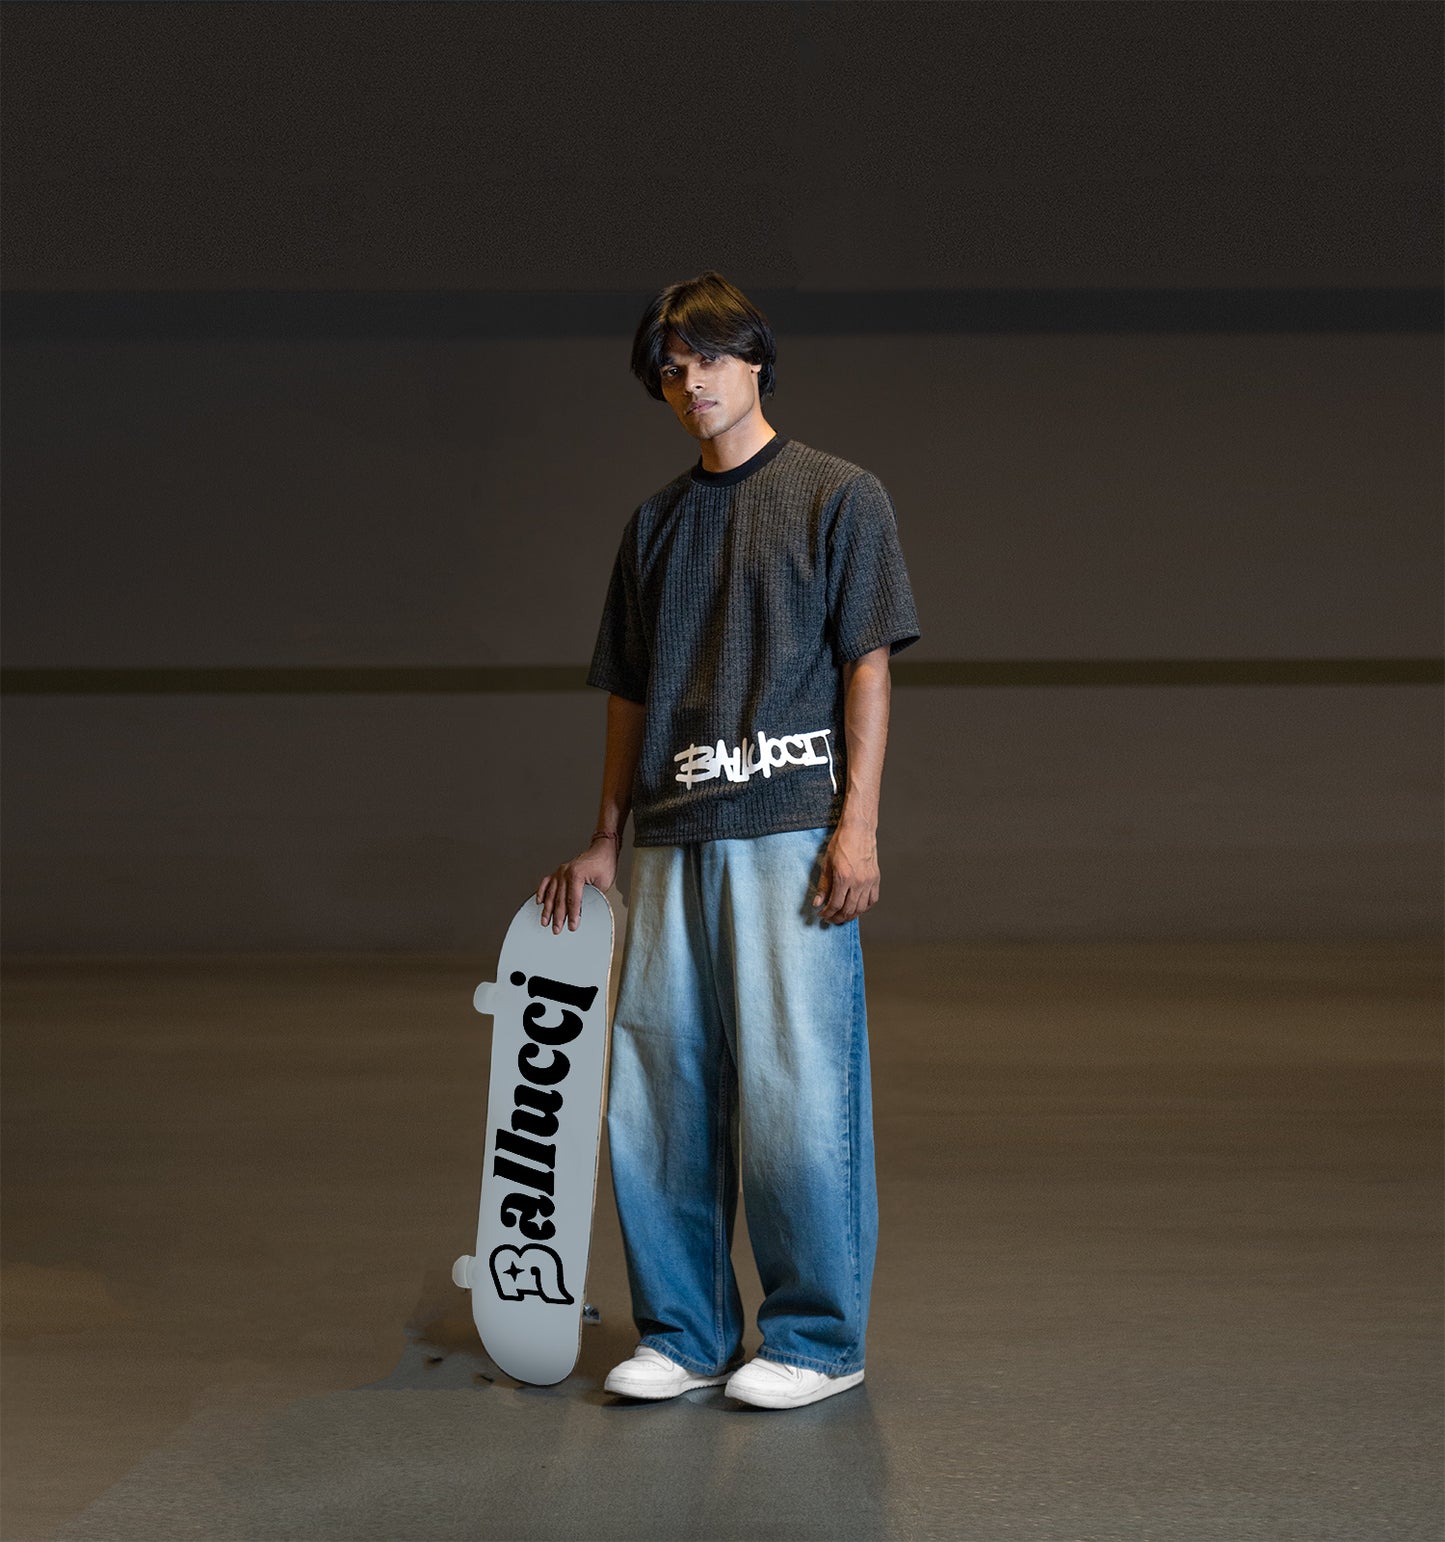 Image of a guy standing with a skateboard black tee from ballucci.